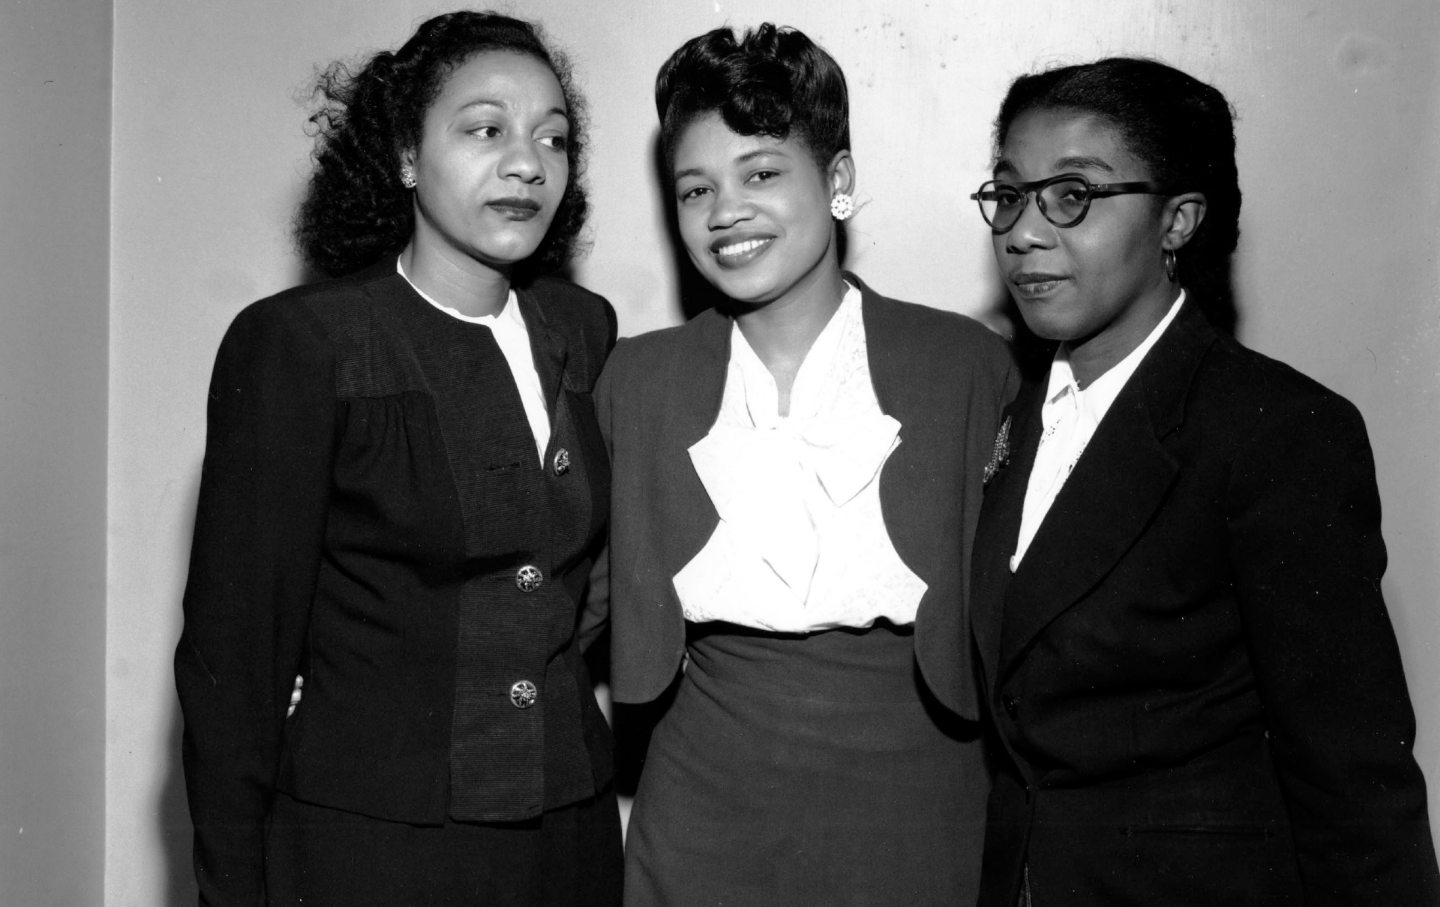 Three Black women in formal dress pose for a photo